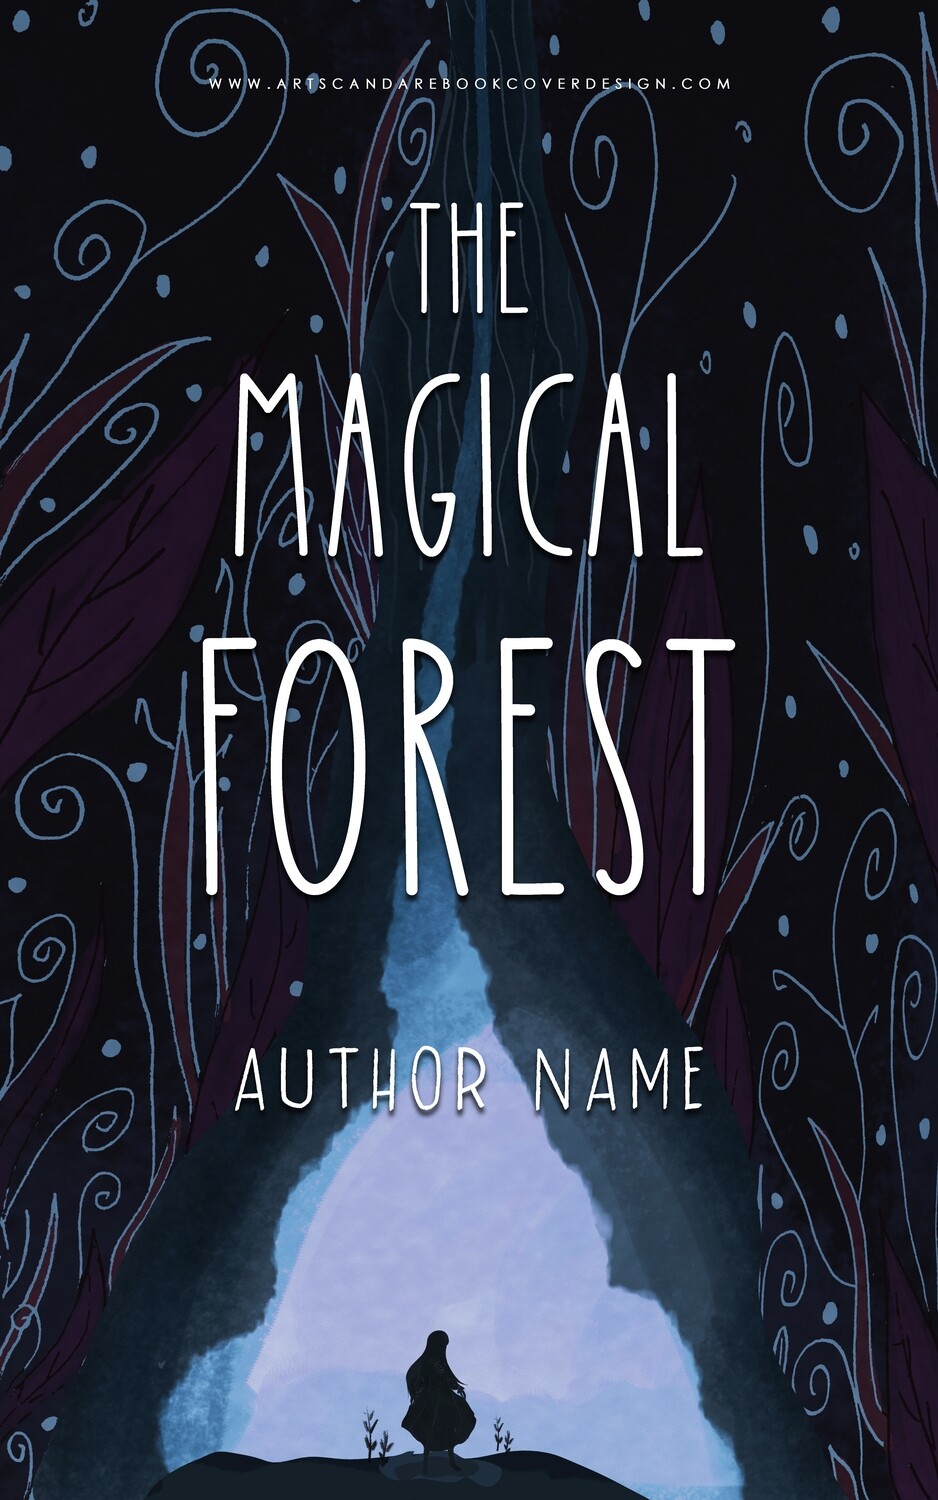 Ebook: The Magical Forest